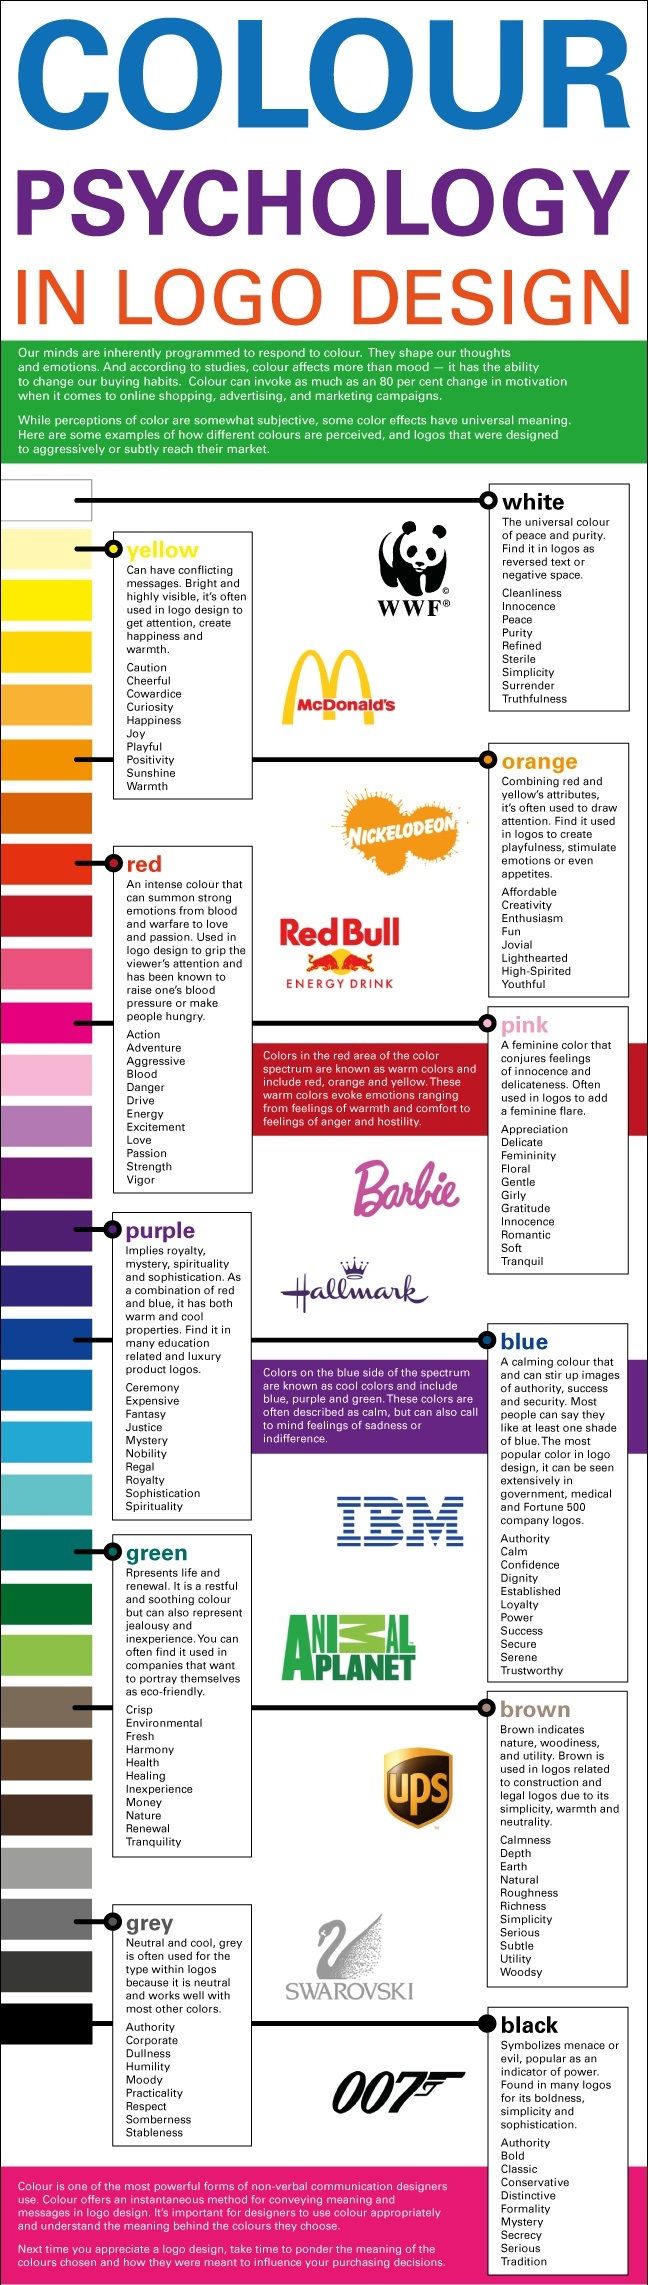 1530274829_851_Marketing-Infographic-Color-psychology-Designers-use-it-to-evoke-a-mood-and-even-change-behaviors.-Cl Marketing Infographic : Color psychology: Designers use it to evoke a mood and even change behaviors. Cl...